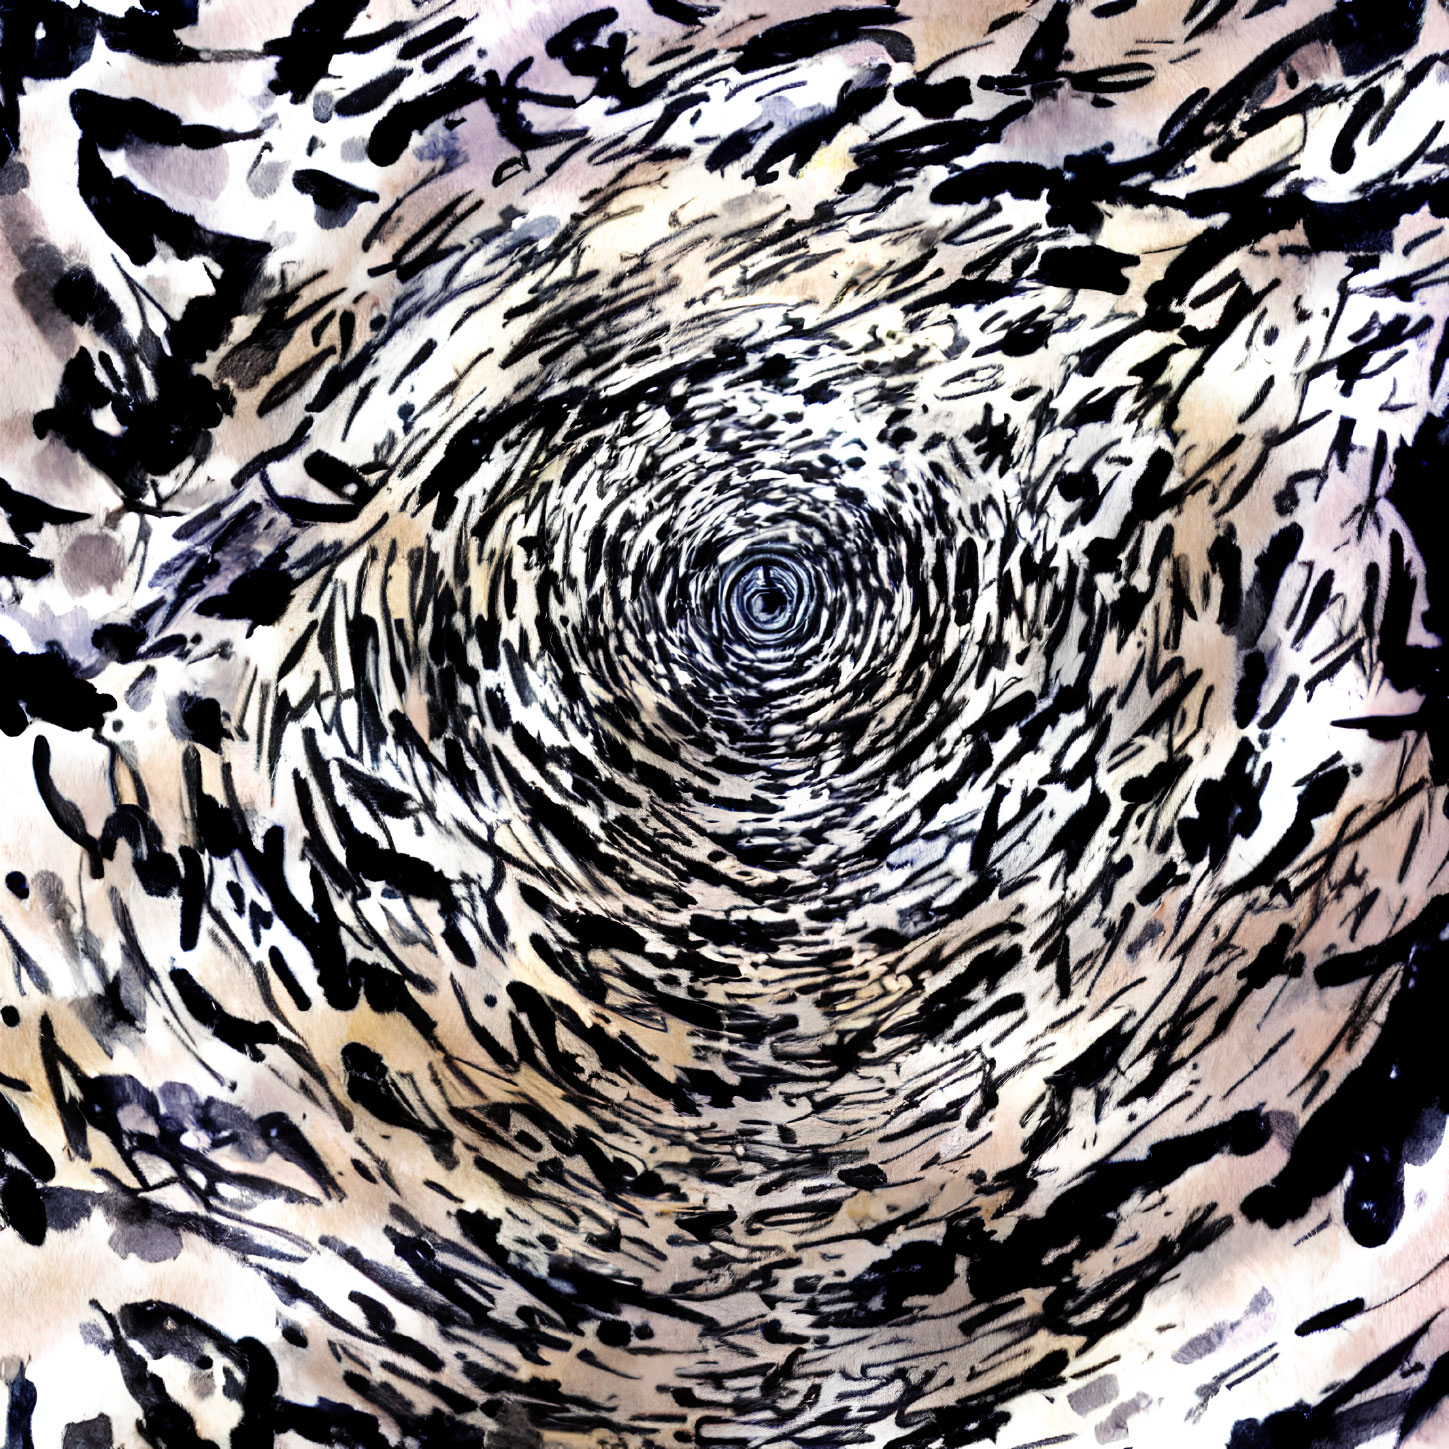 Hypnotic black and brown ink swirl on textured background